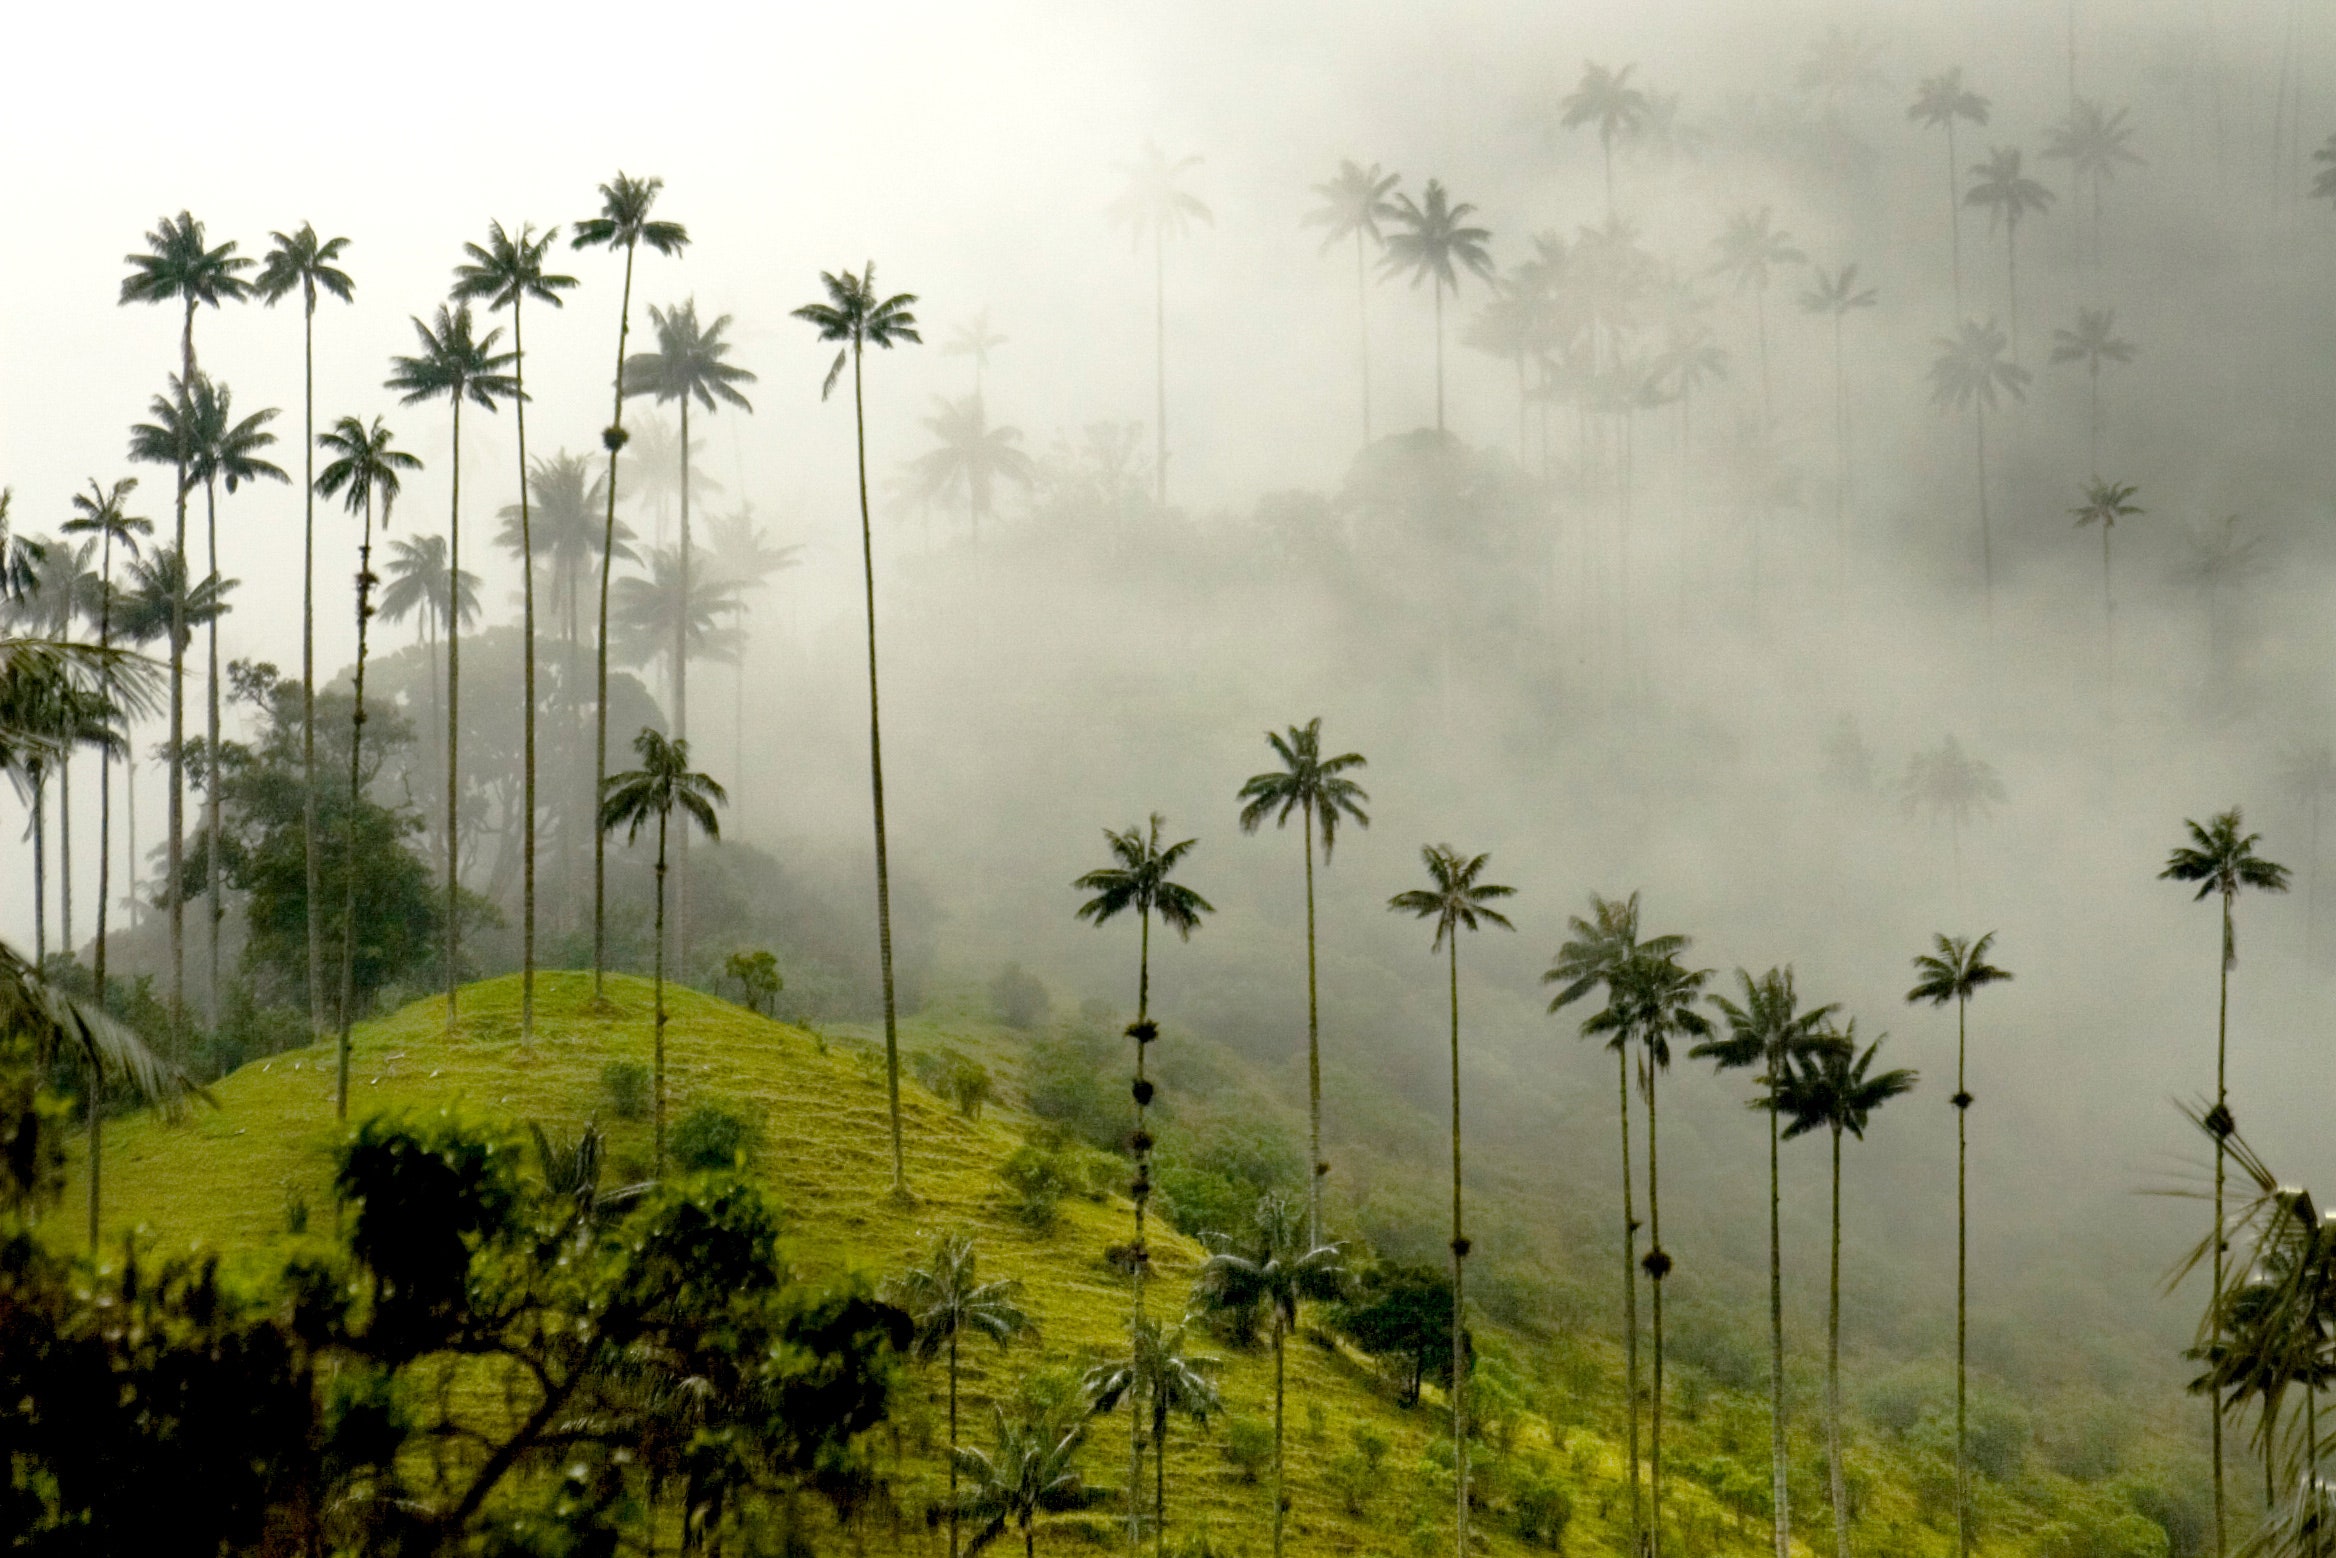 Valle de Cocora is one of the most beautiful landscapes in <a href="https://www.cntraveler.com/gallery/17-reasons-to-visit-colombia?mbid=synd_msn_rss&utm_source=msn&utm_medium=syndication">Colombia</a>—and that’s saying something. The park (about a 7-hour drive west of <a href="https://www.cntraveler.com/story/phillip-lims-life-affirming-trip-to-colombia?mbid=synd_msn_rss&utm_source=msn&utm_medium=syndication">Bogotá</a>) is filled with the tallest palm trees in the world at nearly 200 feet, which look even more incredible set against the backdrop of misty green hills and craggy mountains.<p>Sign up to receive the latest news, expert tips, and inspiration on all things travel</p><a href="https://www.cntraveler.com/newsletter/the-daily?sourceCode=msnsend">Inspire Me</a>